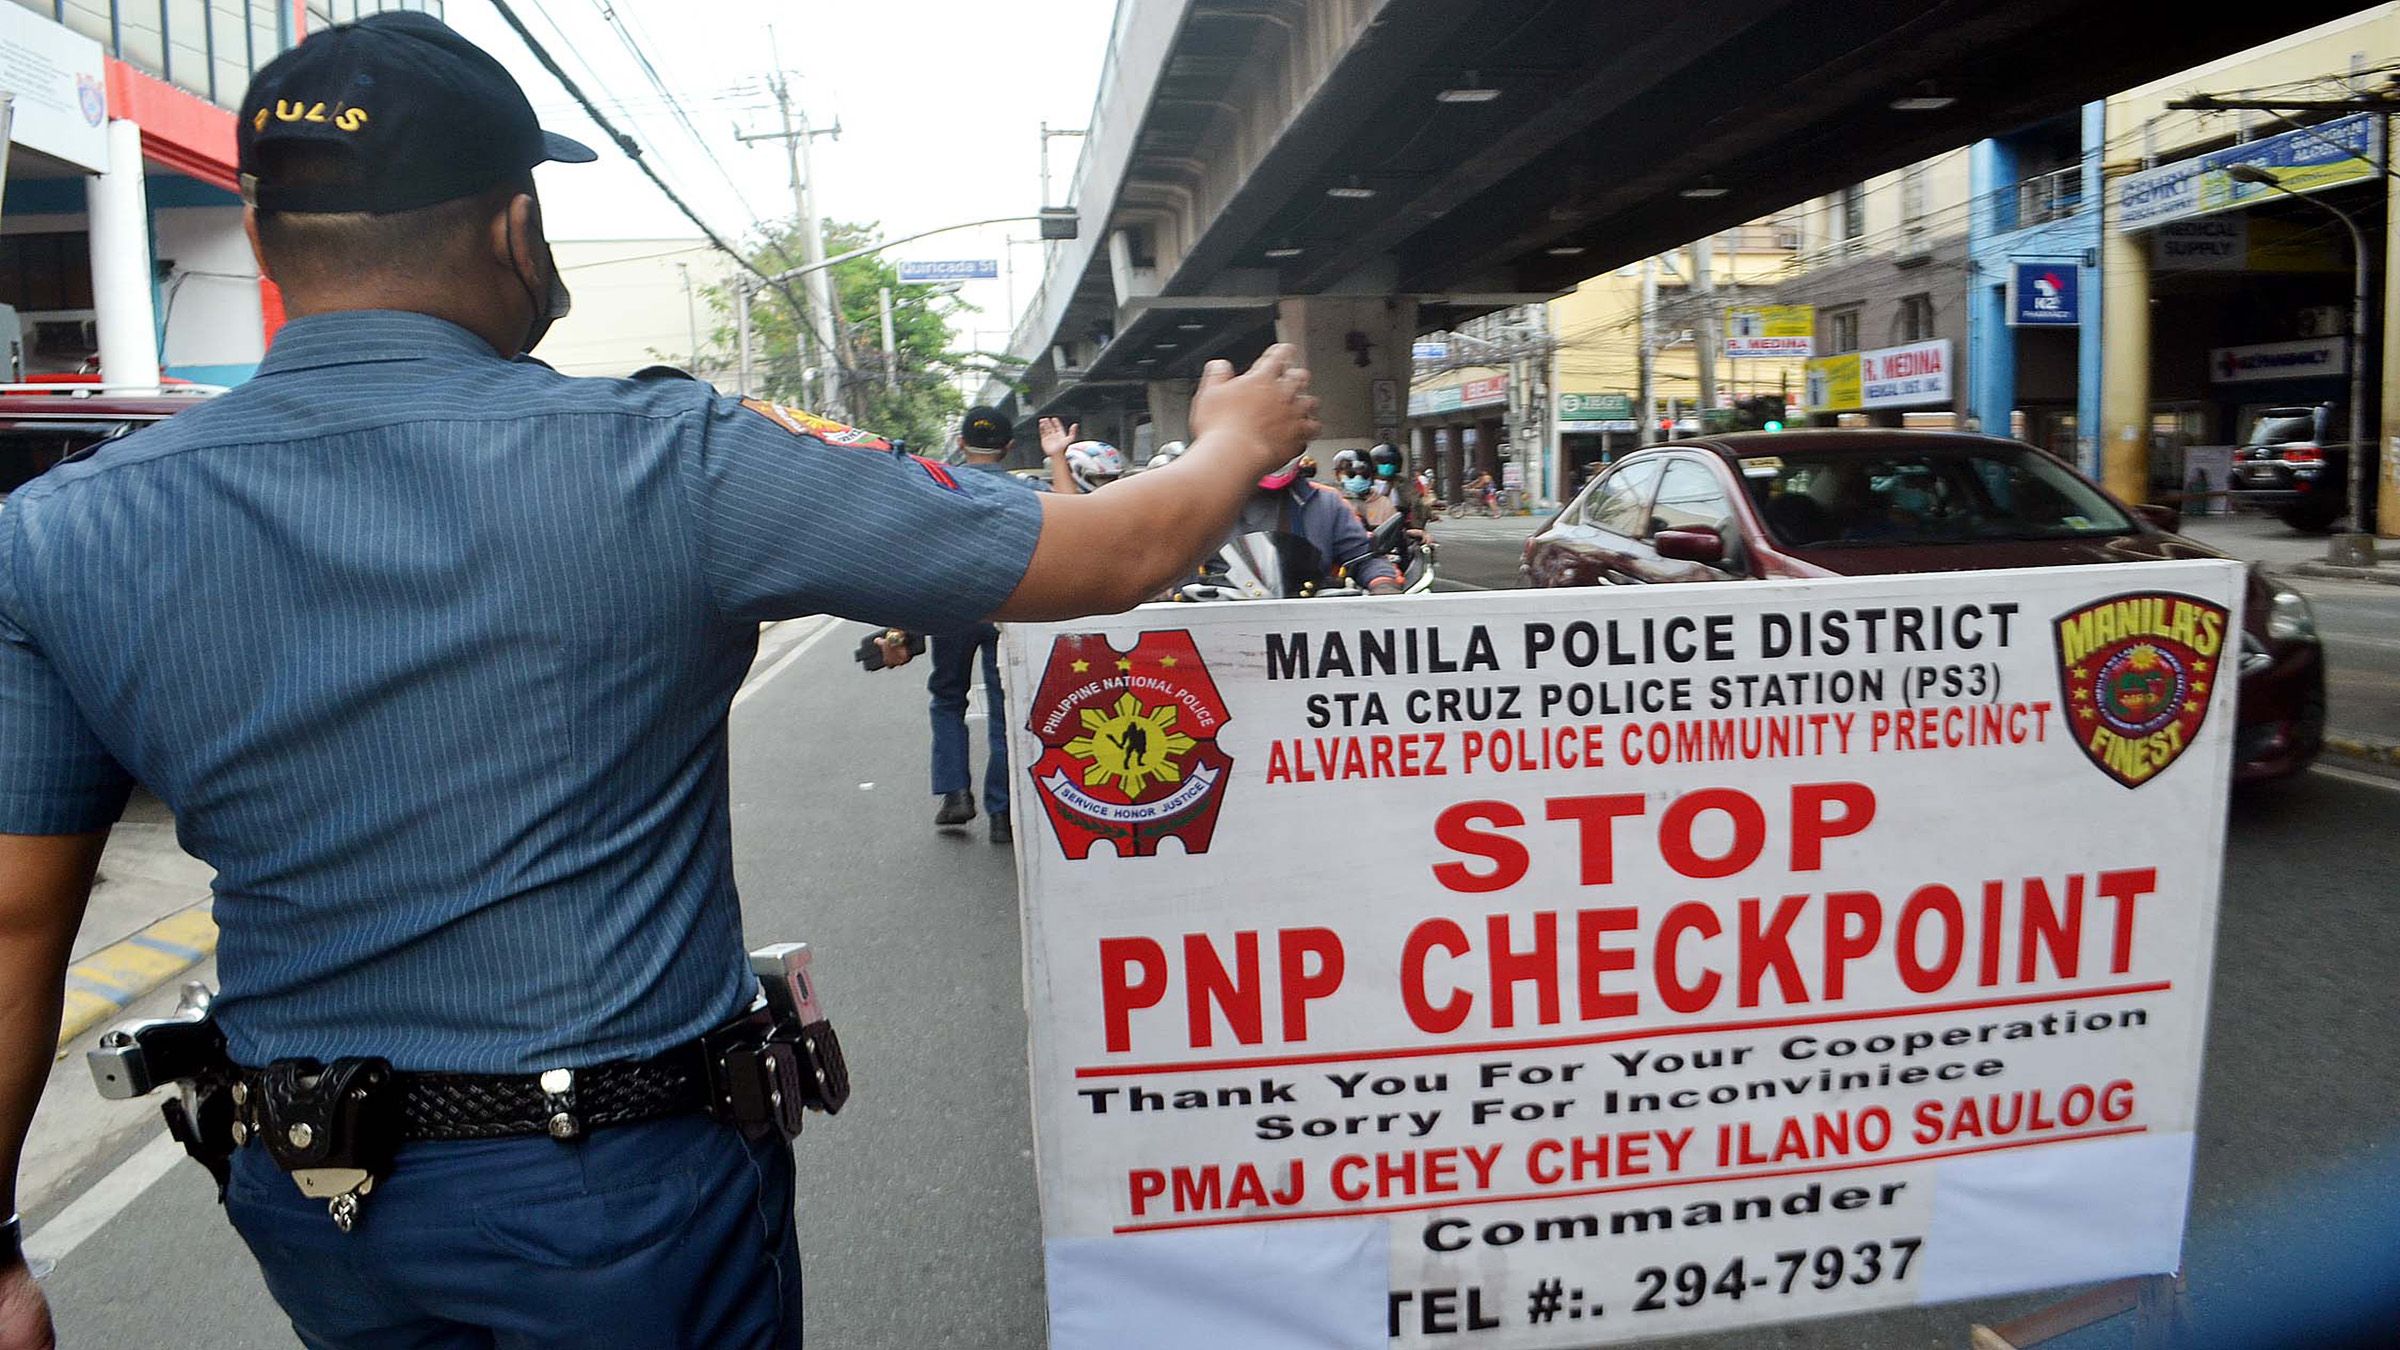 ANTI-CRIMINALITY CHECK POINT Mike Taboy